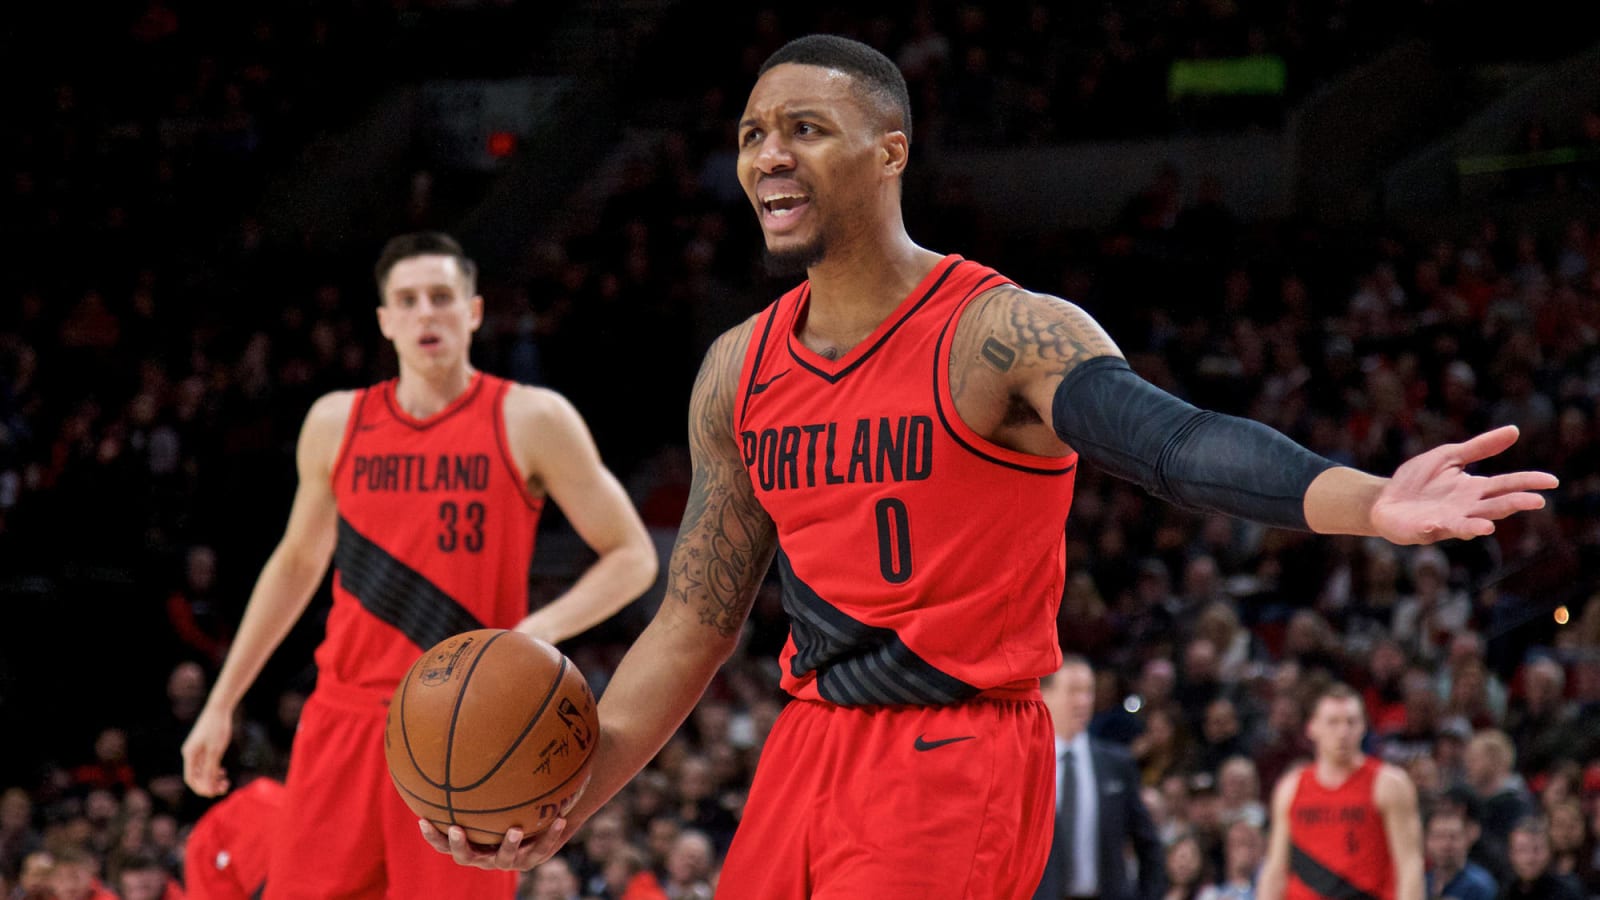 Damian Lillard talks with security over mother’s incident with fan